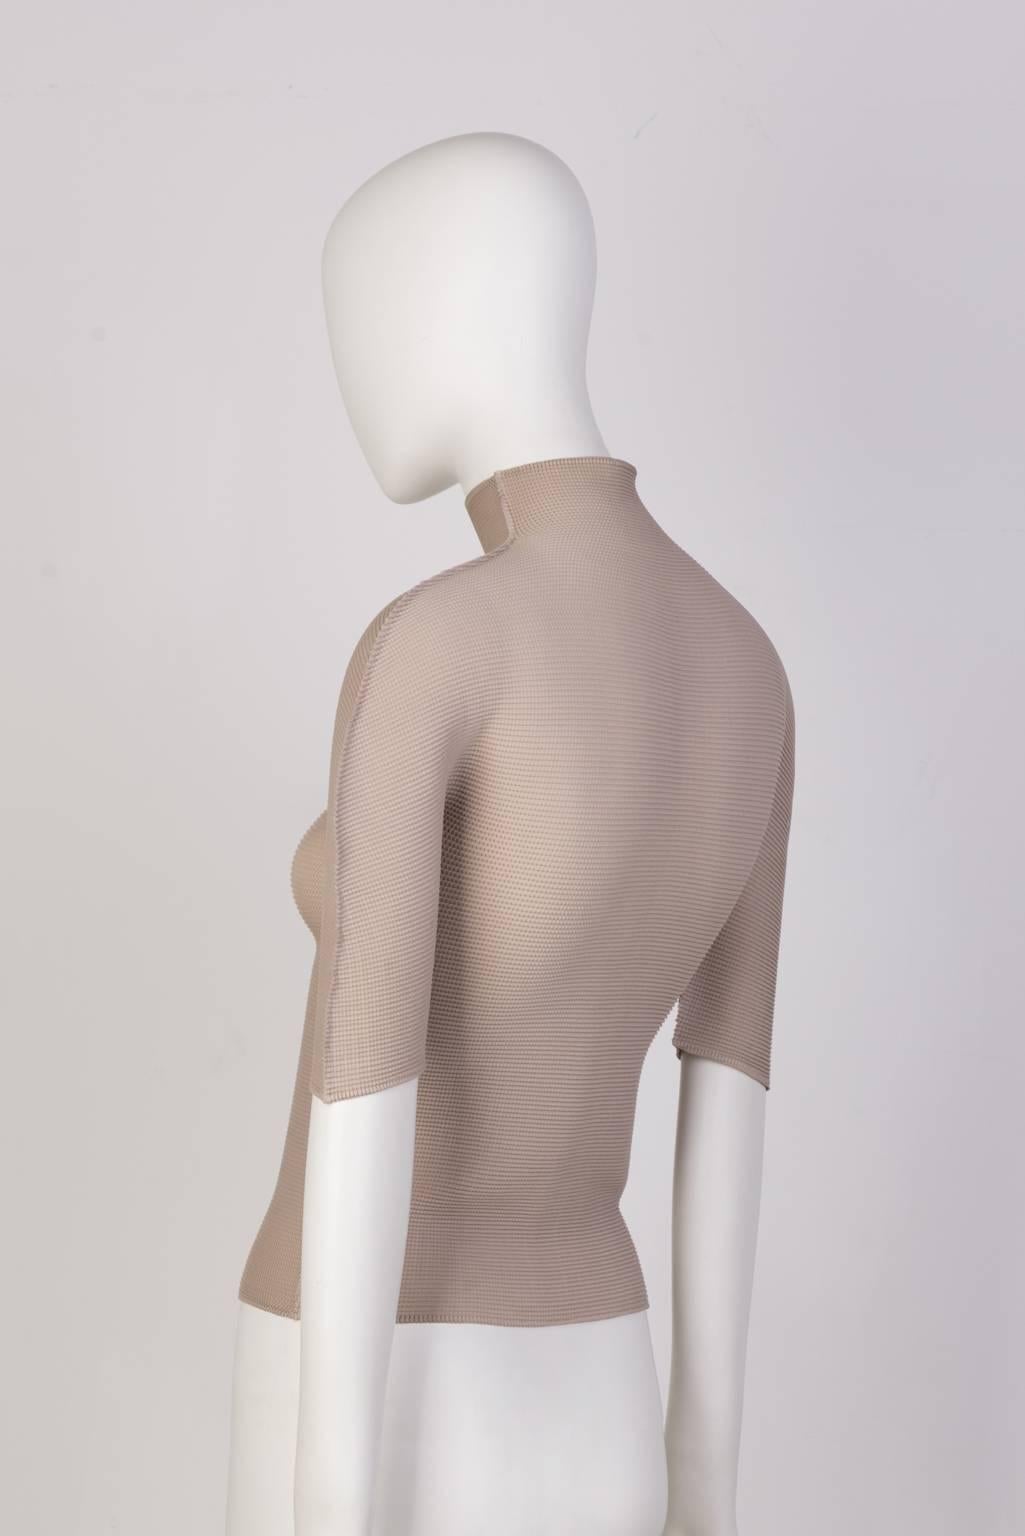 ISSEY MIYAKE PLEATS PLEASE Turtleneck In Excellent Condition For Sale In Xiamen, Fujian